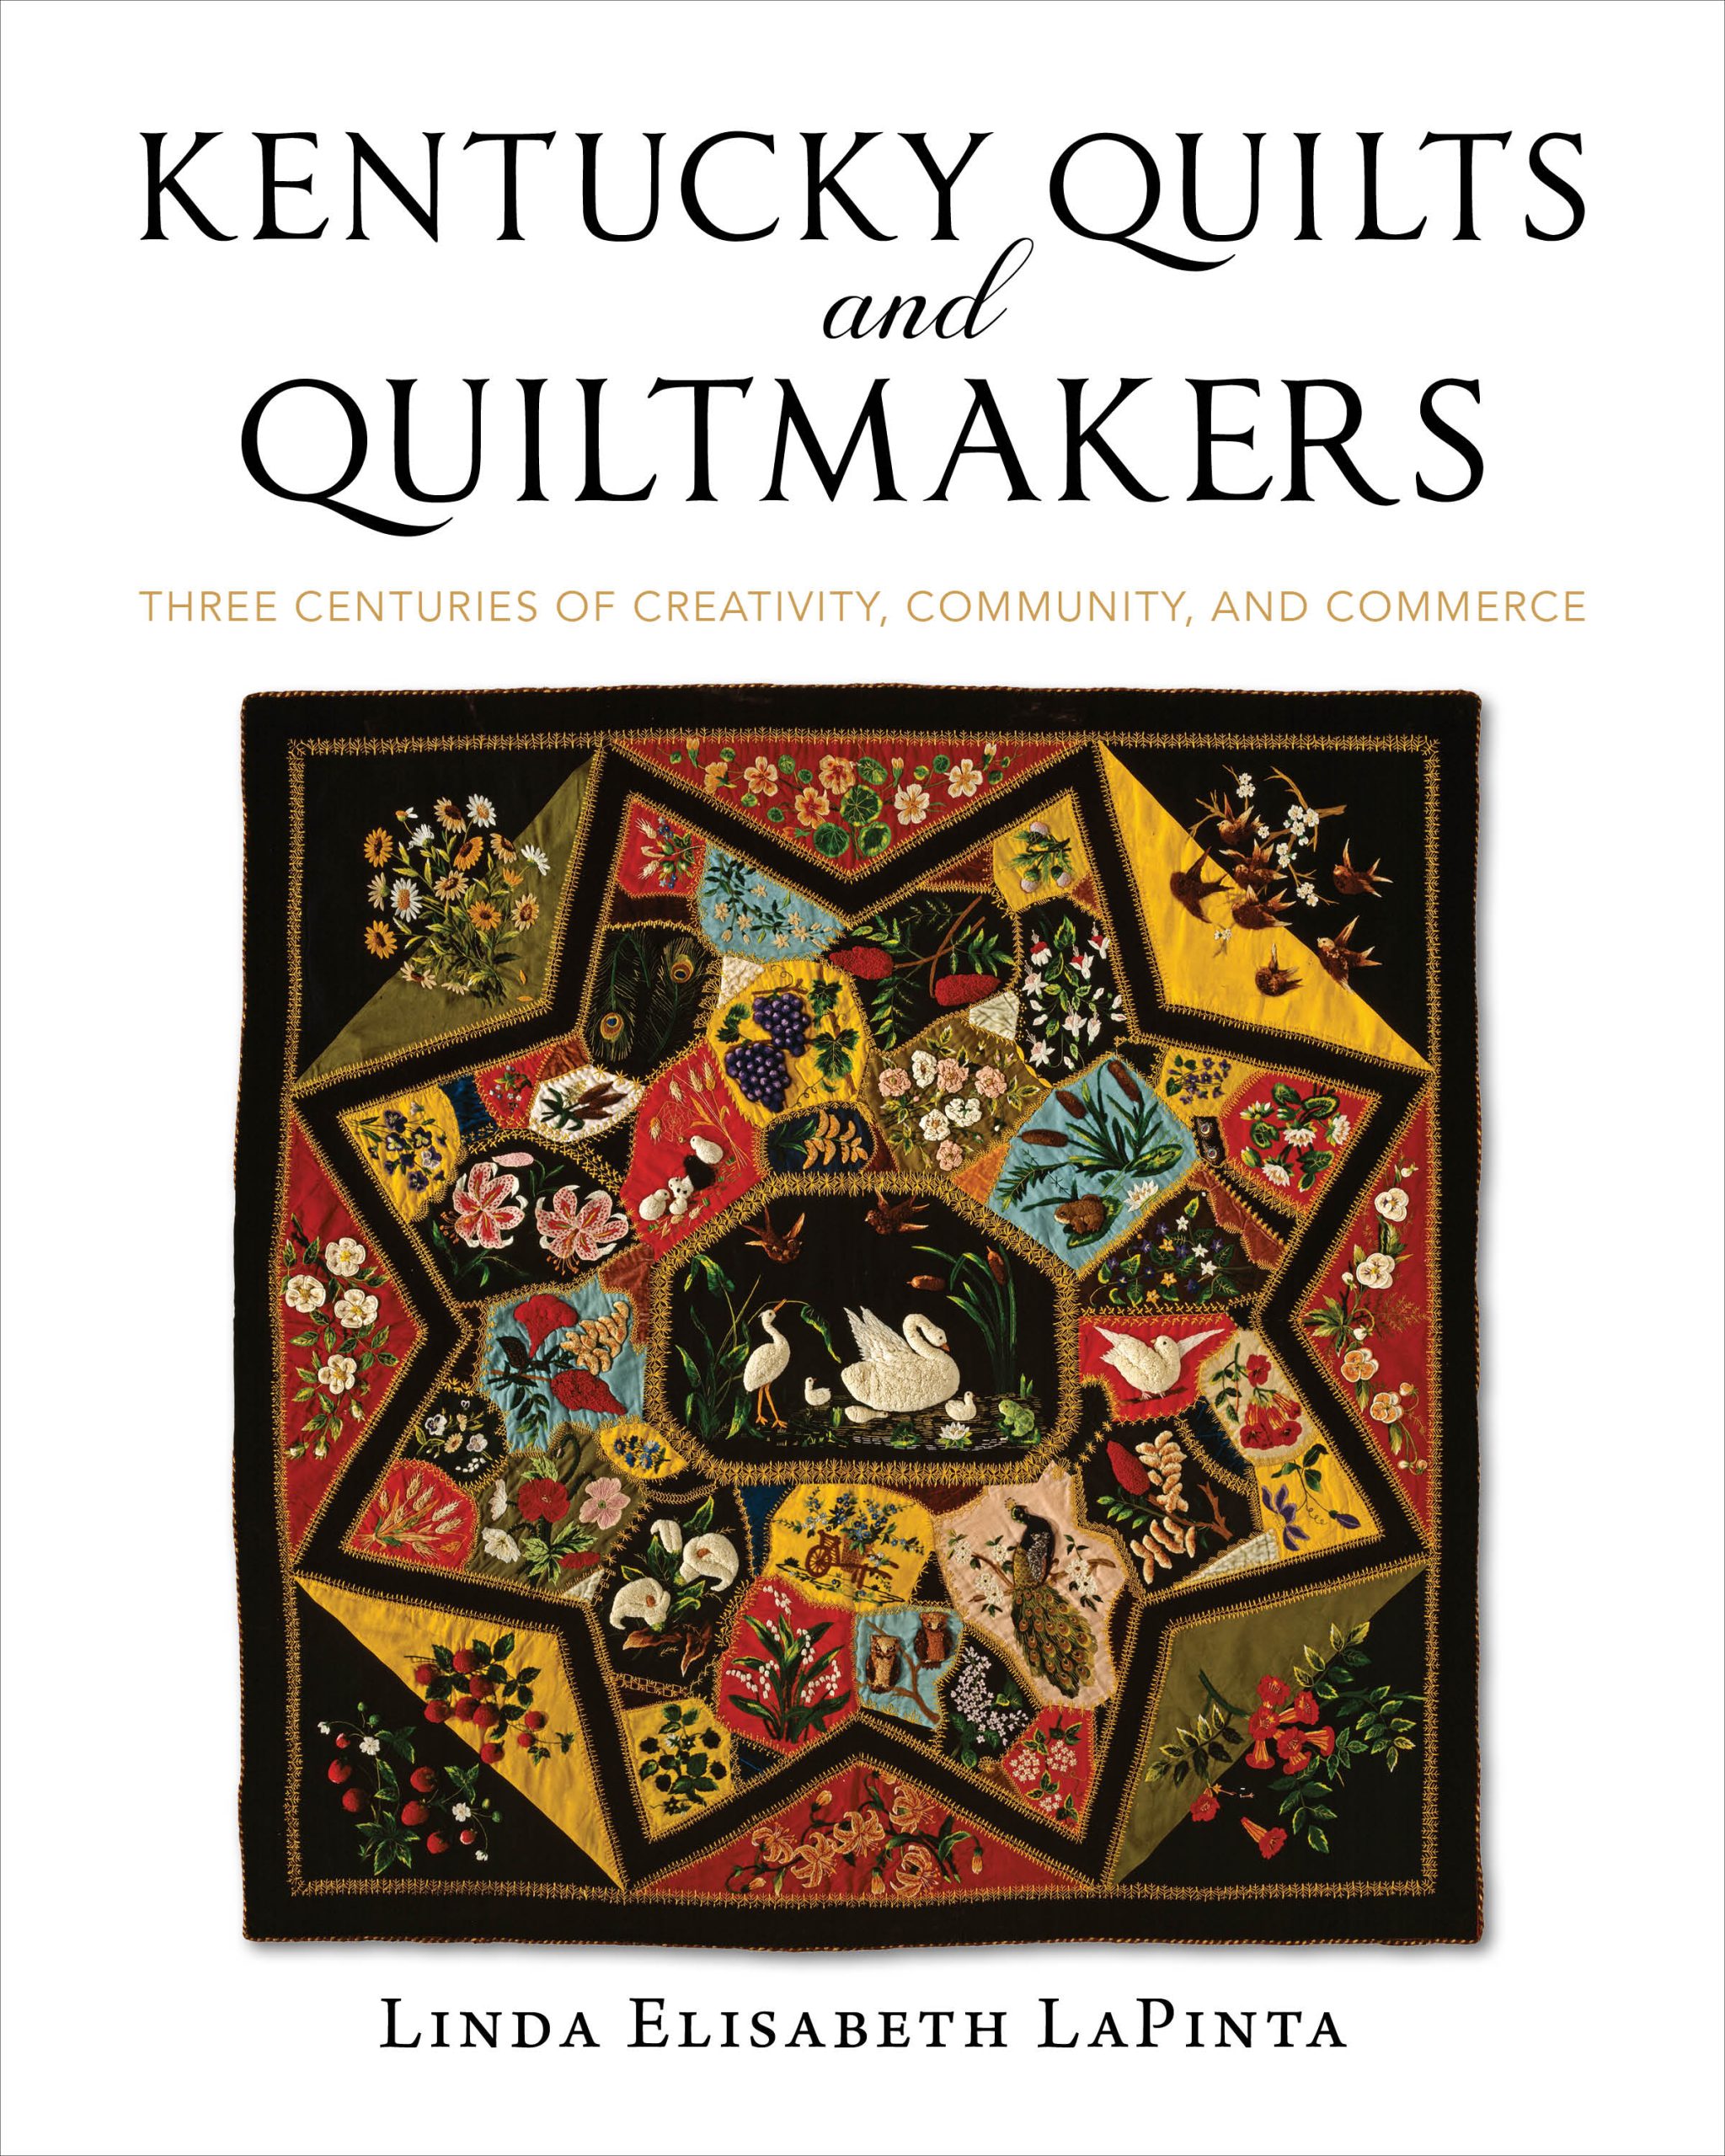 Linda Elisabeth LaPinta to Participate in the Kentucky Book Festival with “Kentucky Quilts and Quiltmakers: Three Centuries of Creativity, Community, and Commerce”